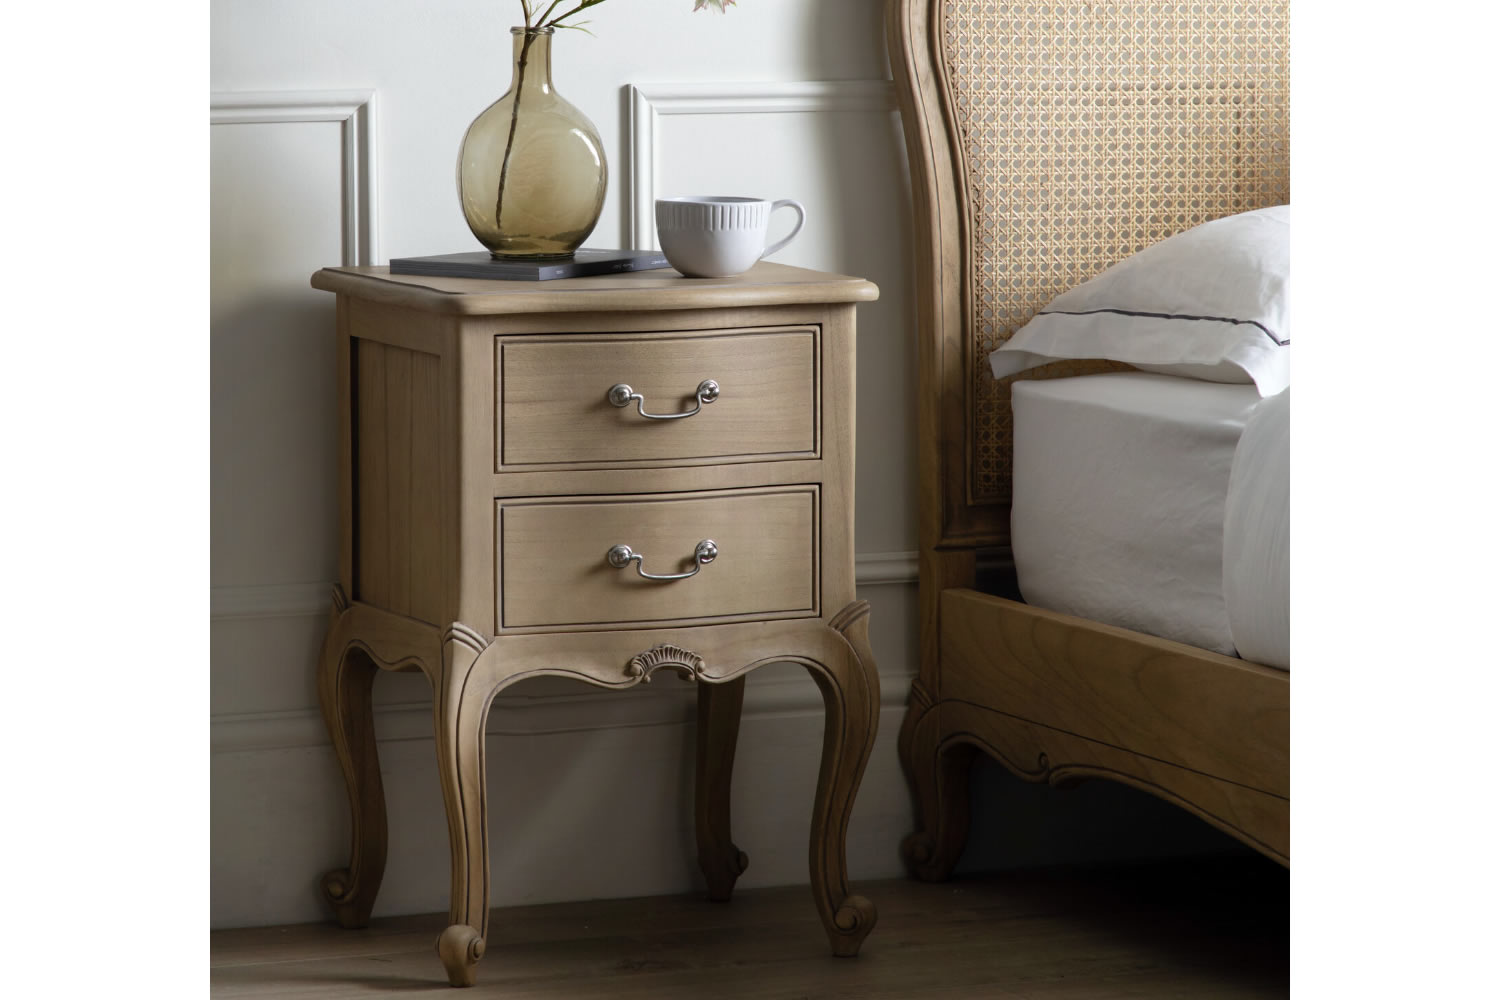 View Chic 2drawer Bedside Table With Decorative Handles Weathered Finish Ample Storage Space Living Room Or Bedroom Storage Table Frenchinspired information